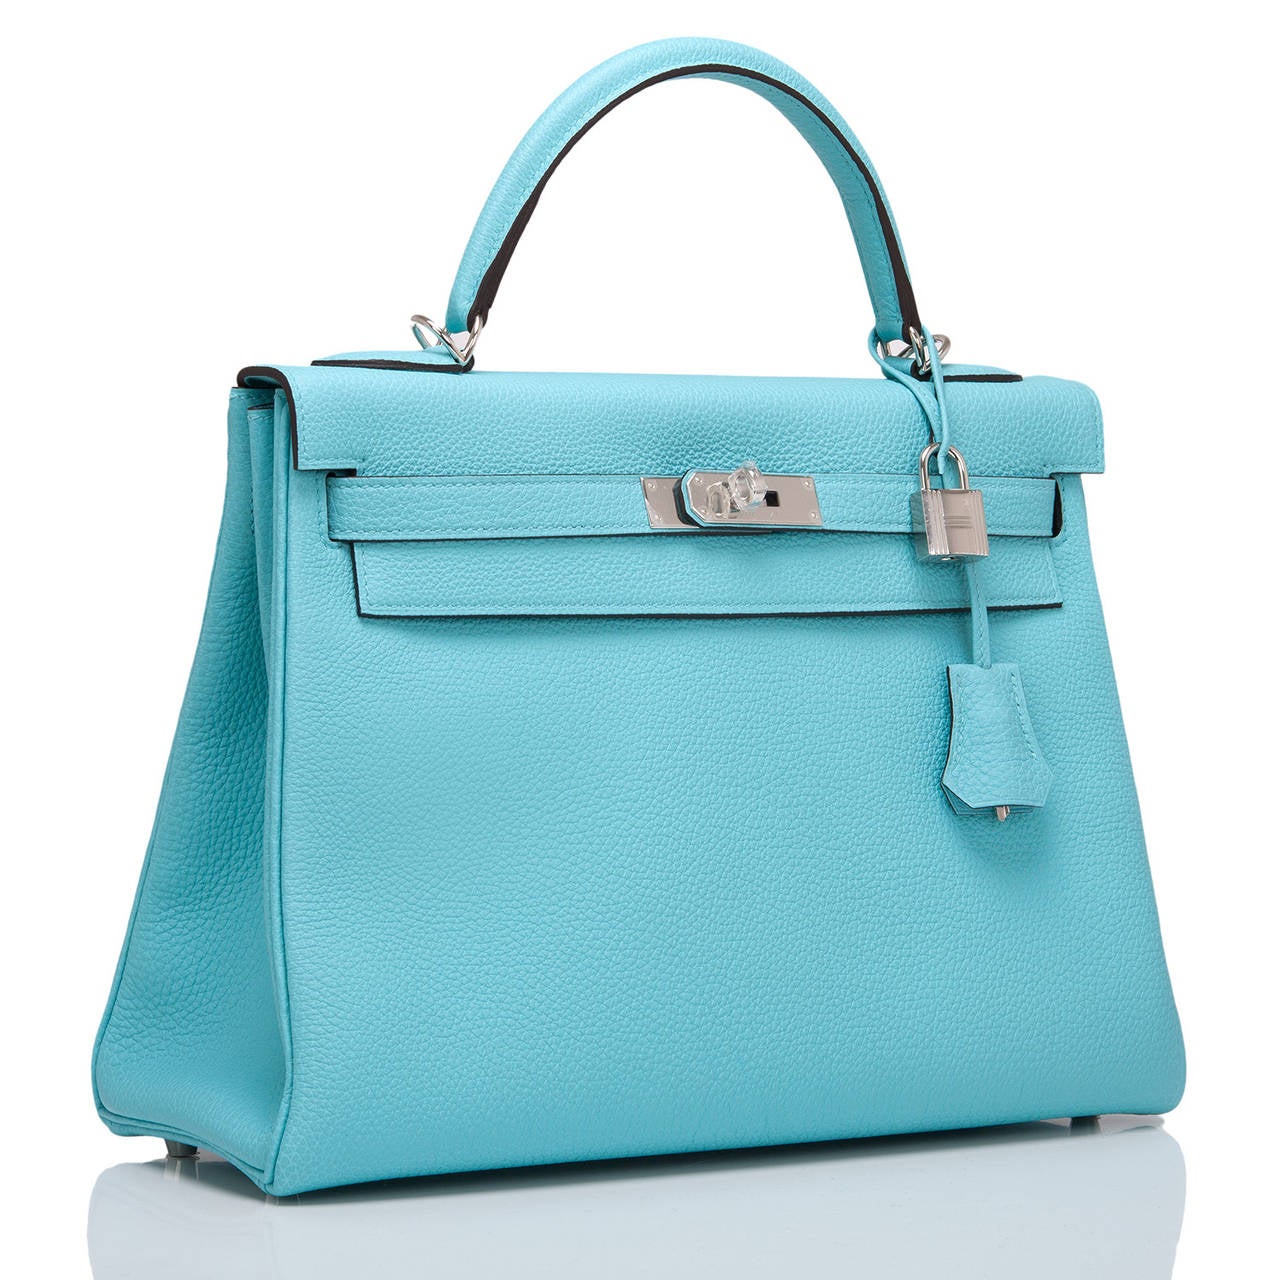 Hermes Blue Atoll Kelly 32cm in rich togo (bull) leather with palladium hardware.

This Kelly features tonal stitching, front toggle closure, a clochette with lock and two keys and a single rolled handle. The interior is lined in Blue Atoll chevre